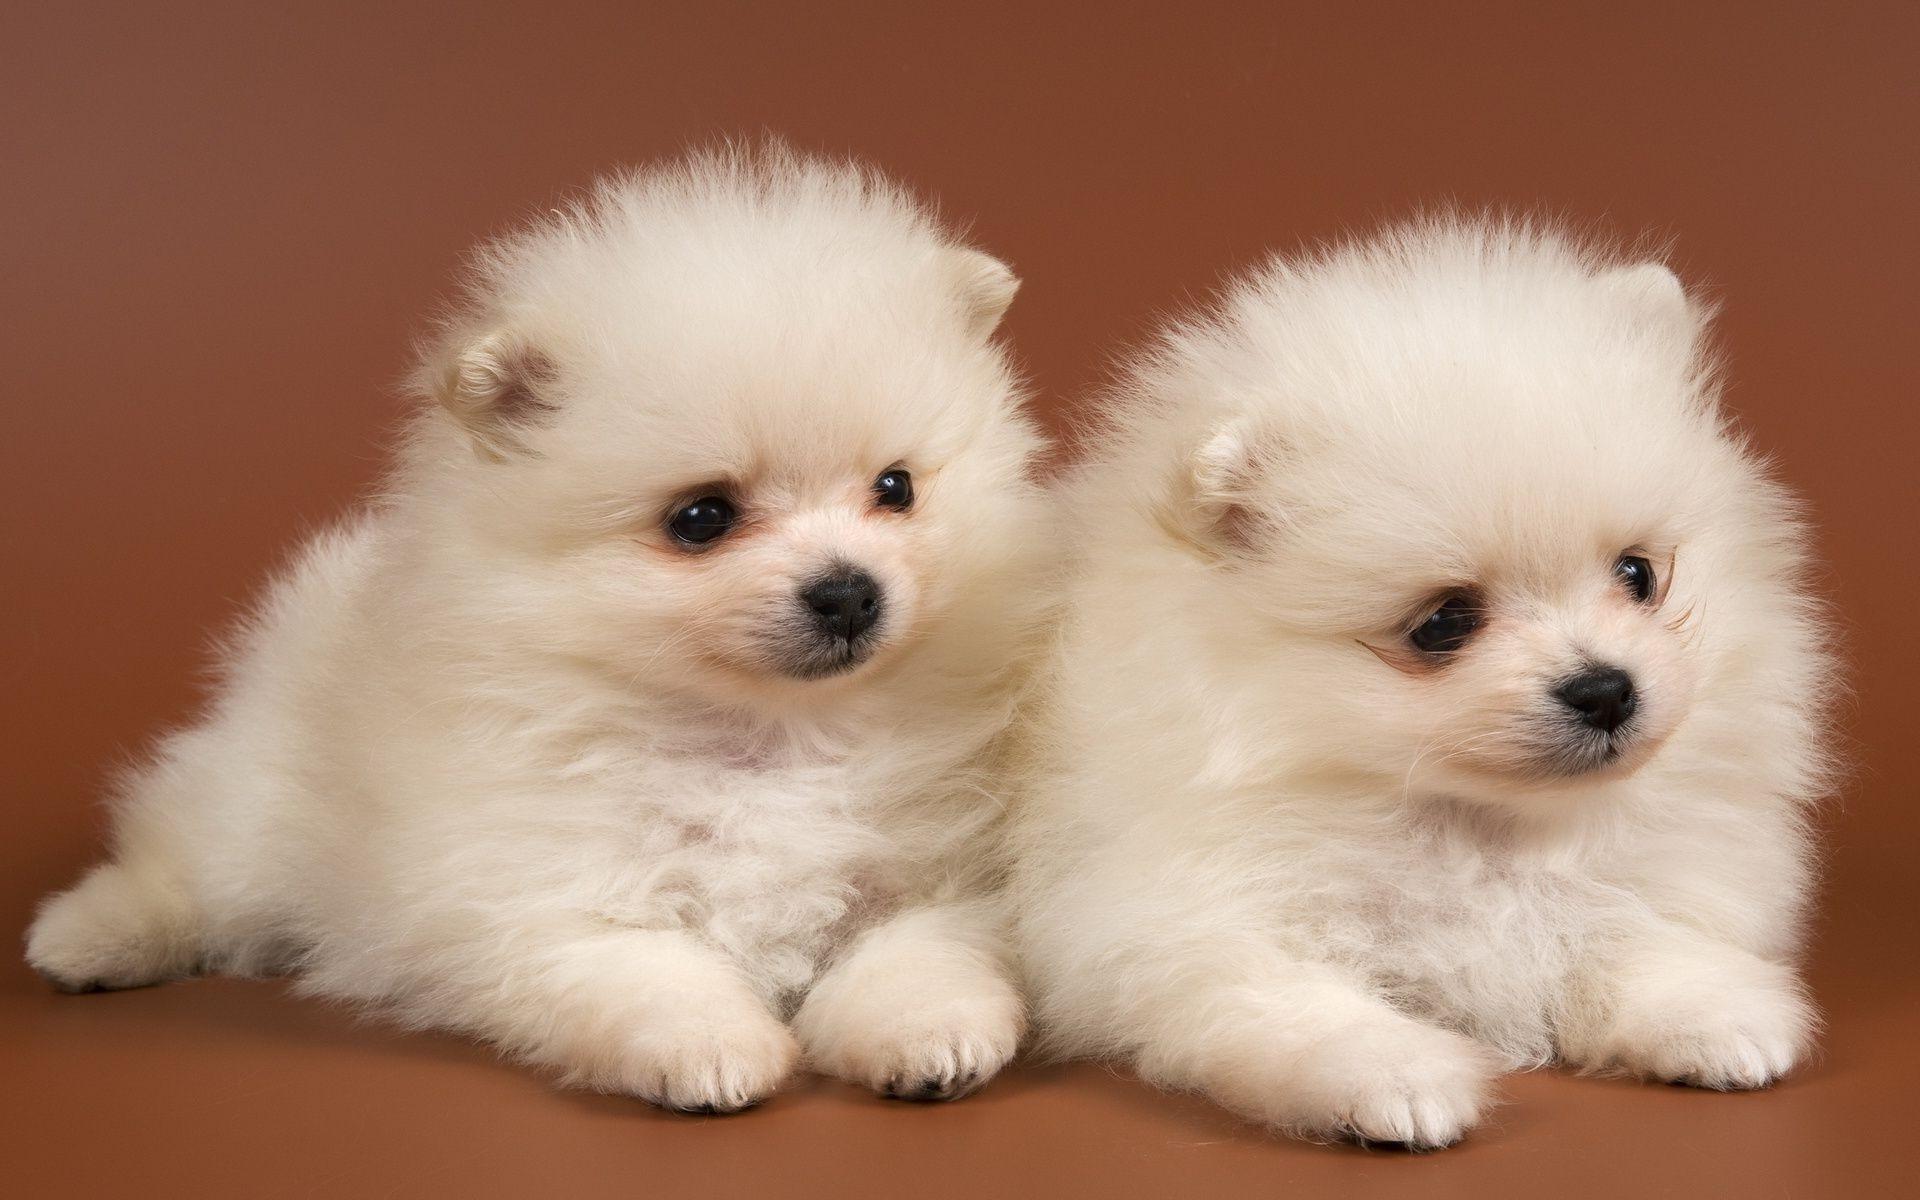 Fluffy puppies Chow Chow snow white Android wallpapers for free